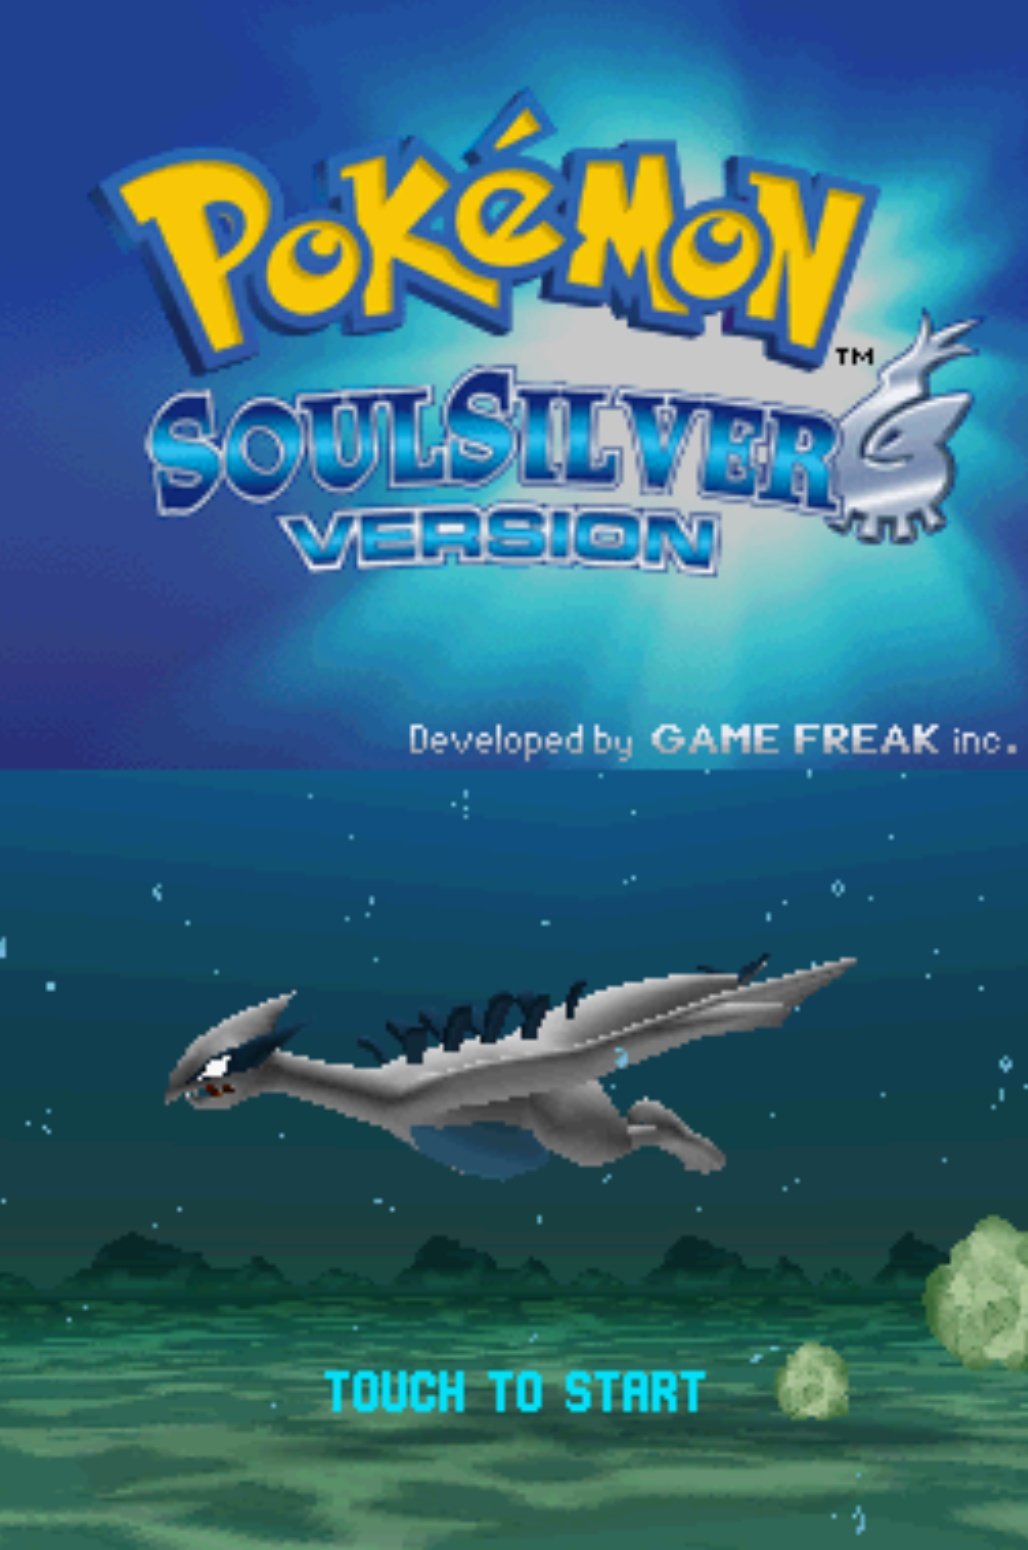 CEO of Sinnoh 🌟 on Twitter: "Pokémon SoulSilver and for NDS were released on this day in Japan, 12 ago (2009) https://t.co/49Kc1e7mKR" /